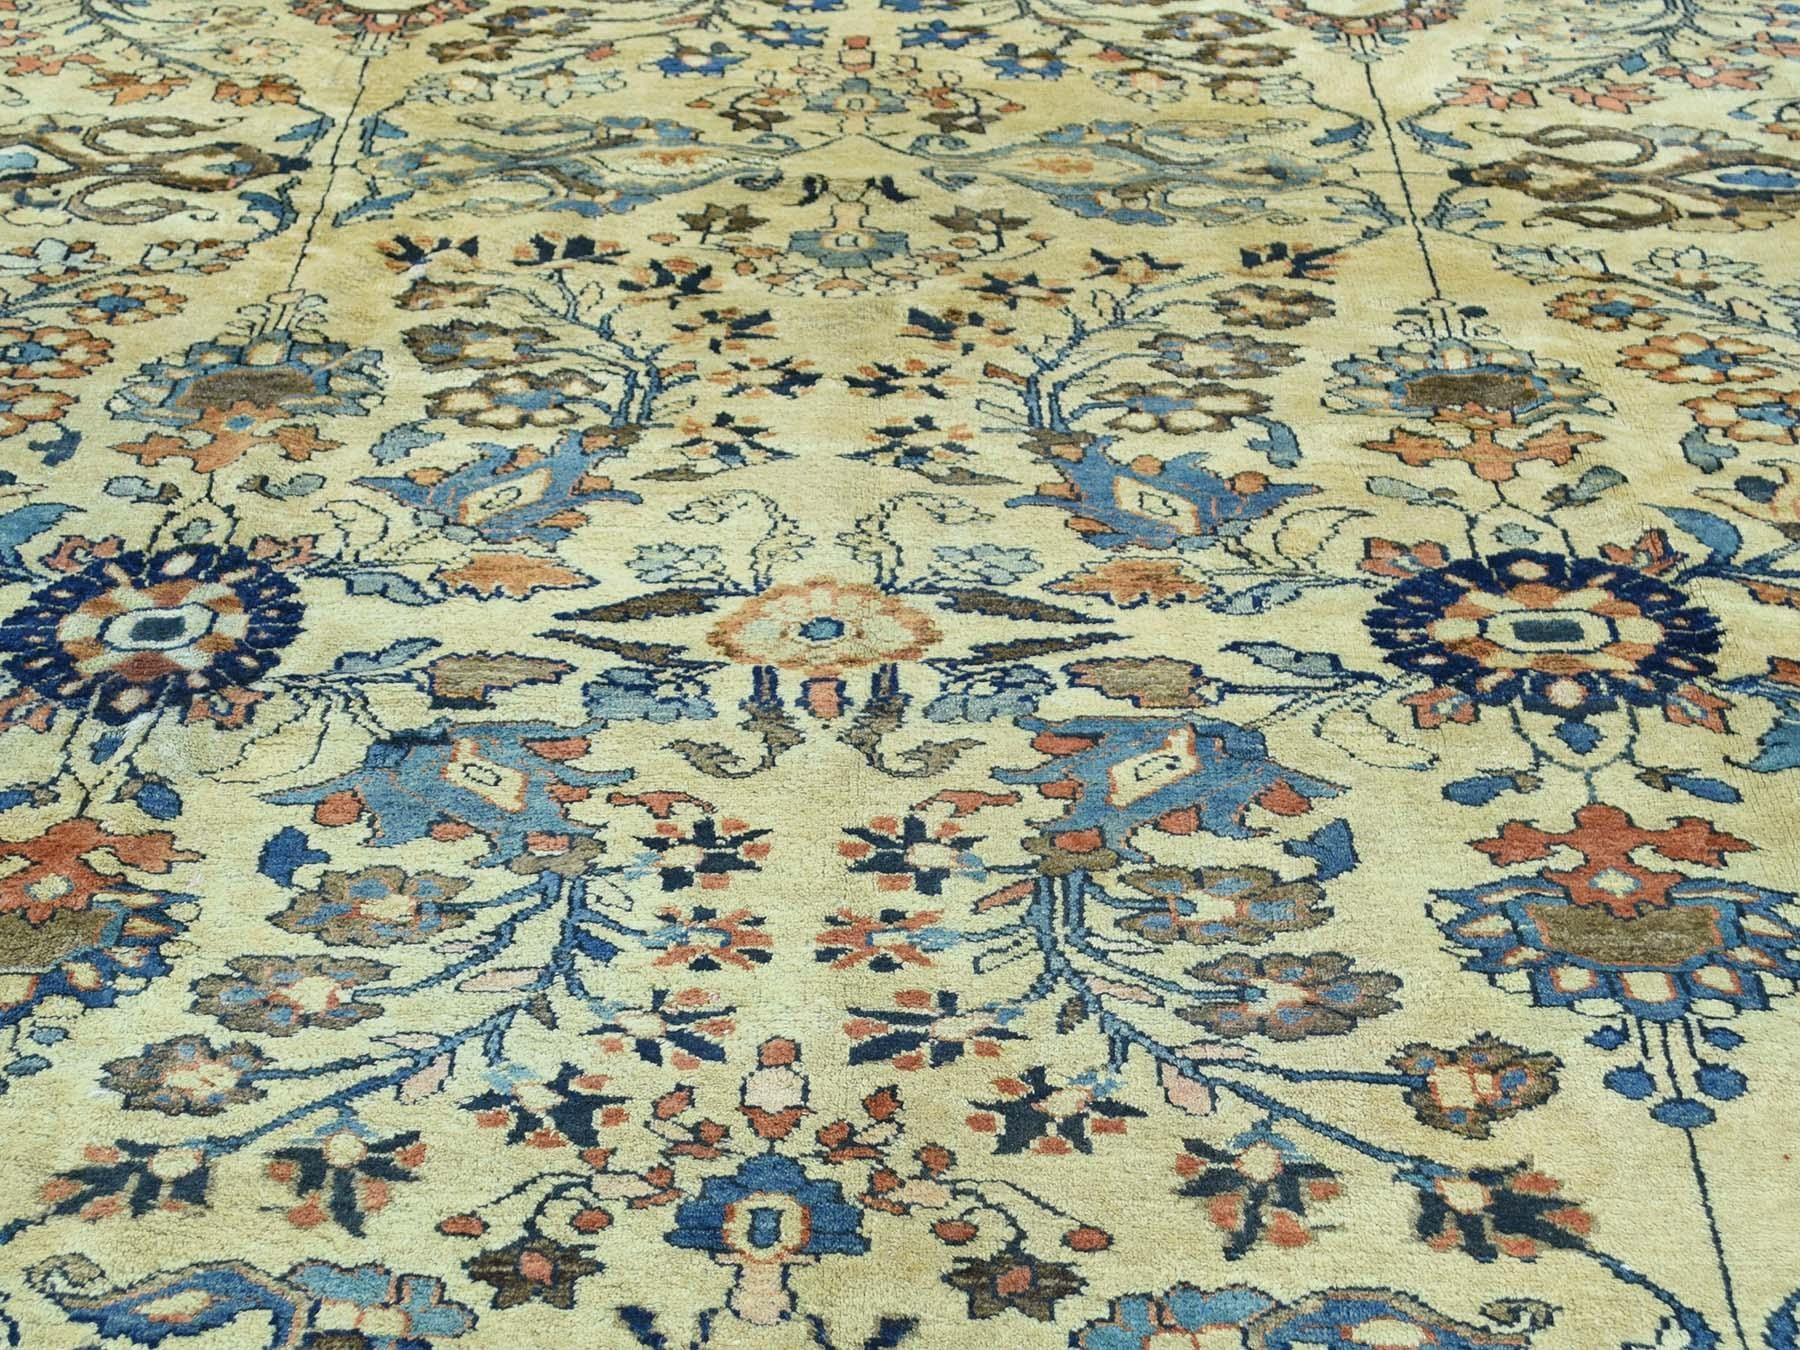 This is a genuine hand knotted oriental rug. It is not hand tufted or machine made rug. Our entire inventory is made of either hand knotted or handwoven rugs.

Decorate your home with this high quality handmade carpet. This handcrafted antique